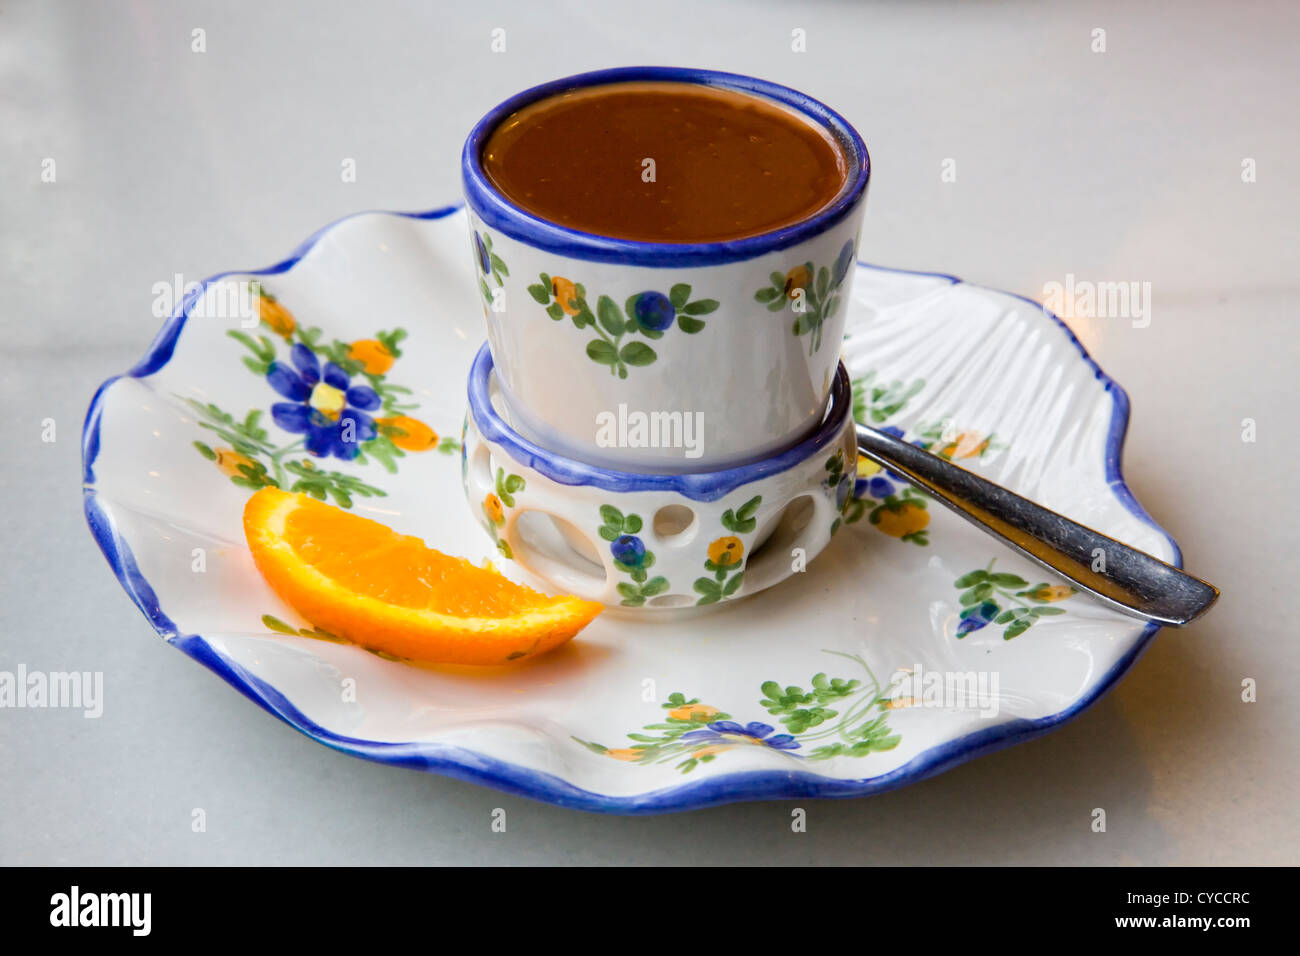 Hot chocolate served in a decorated porcelain cup Stock Photo